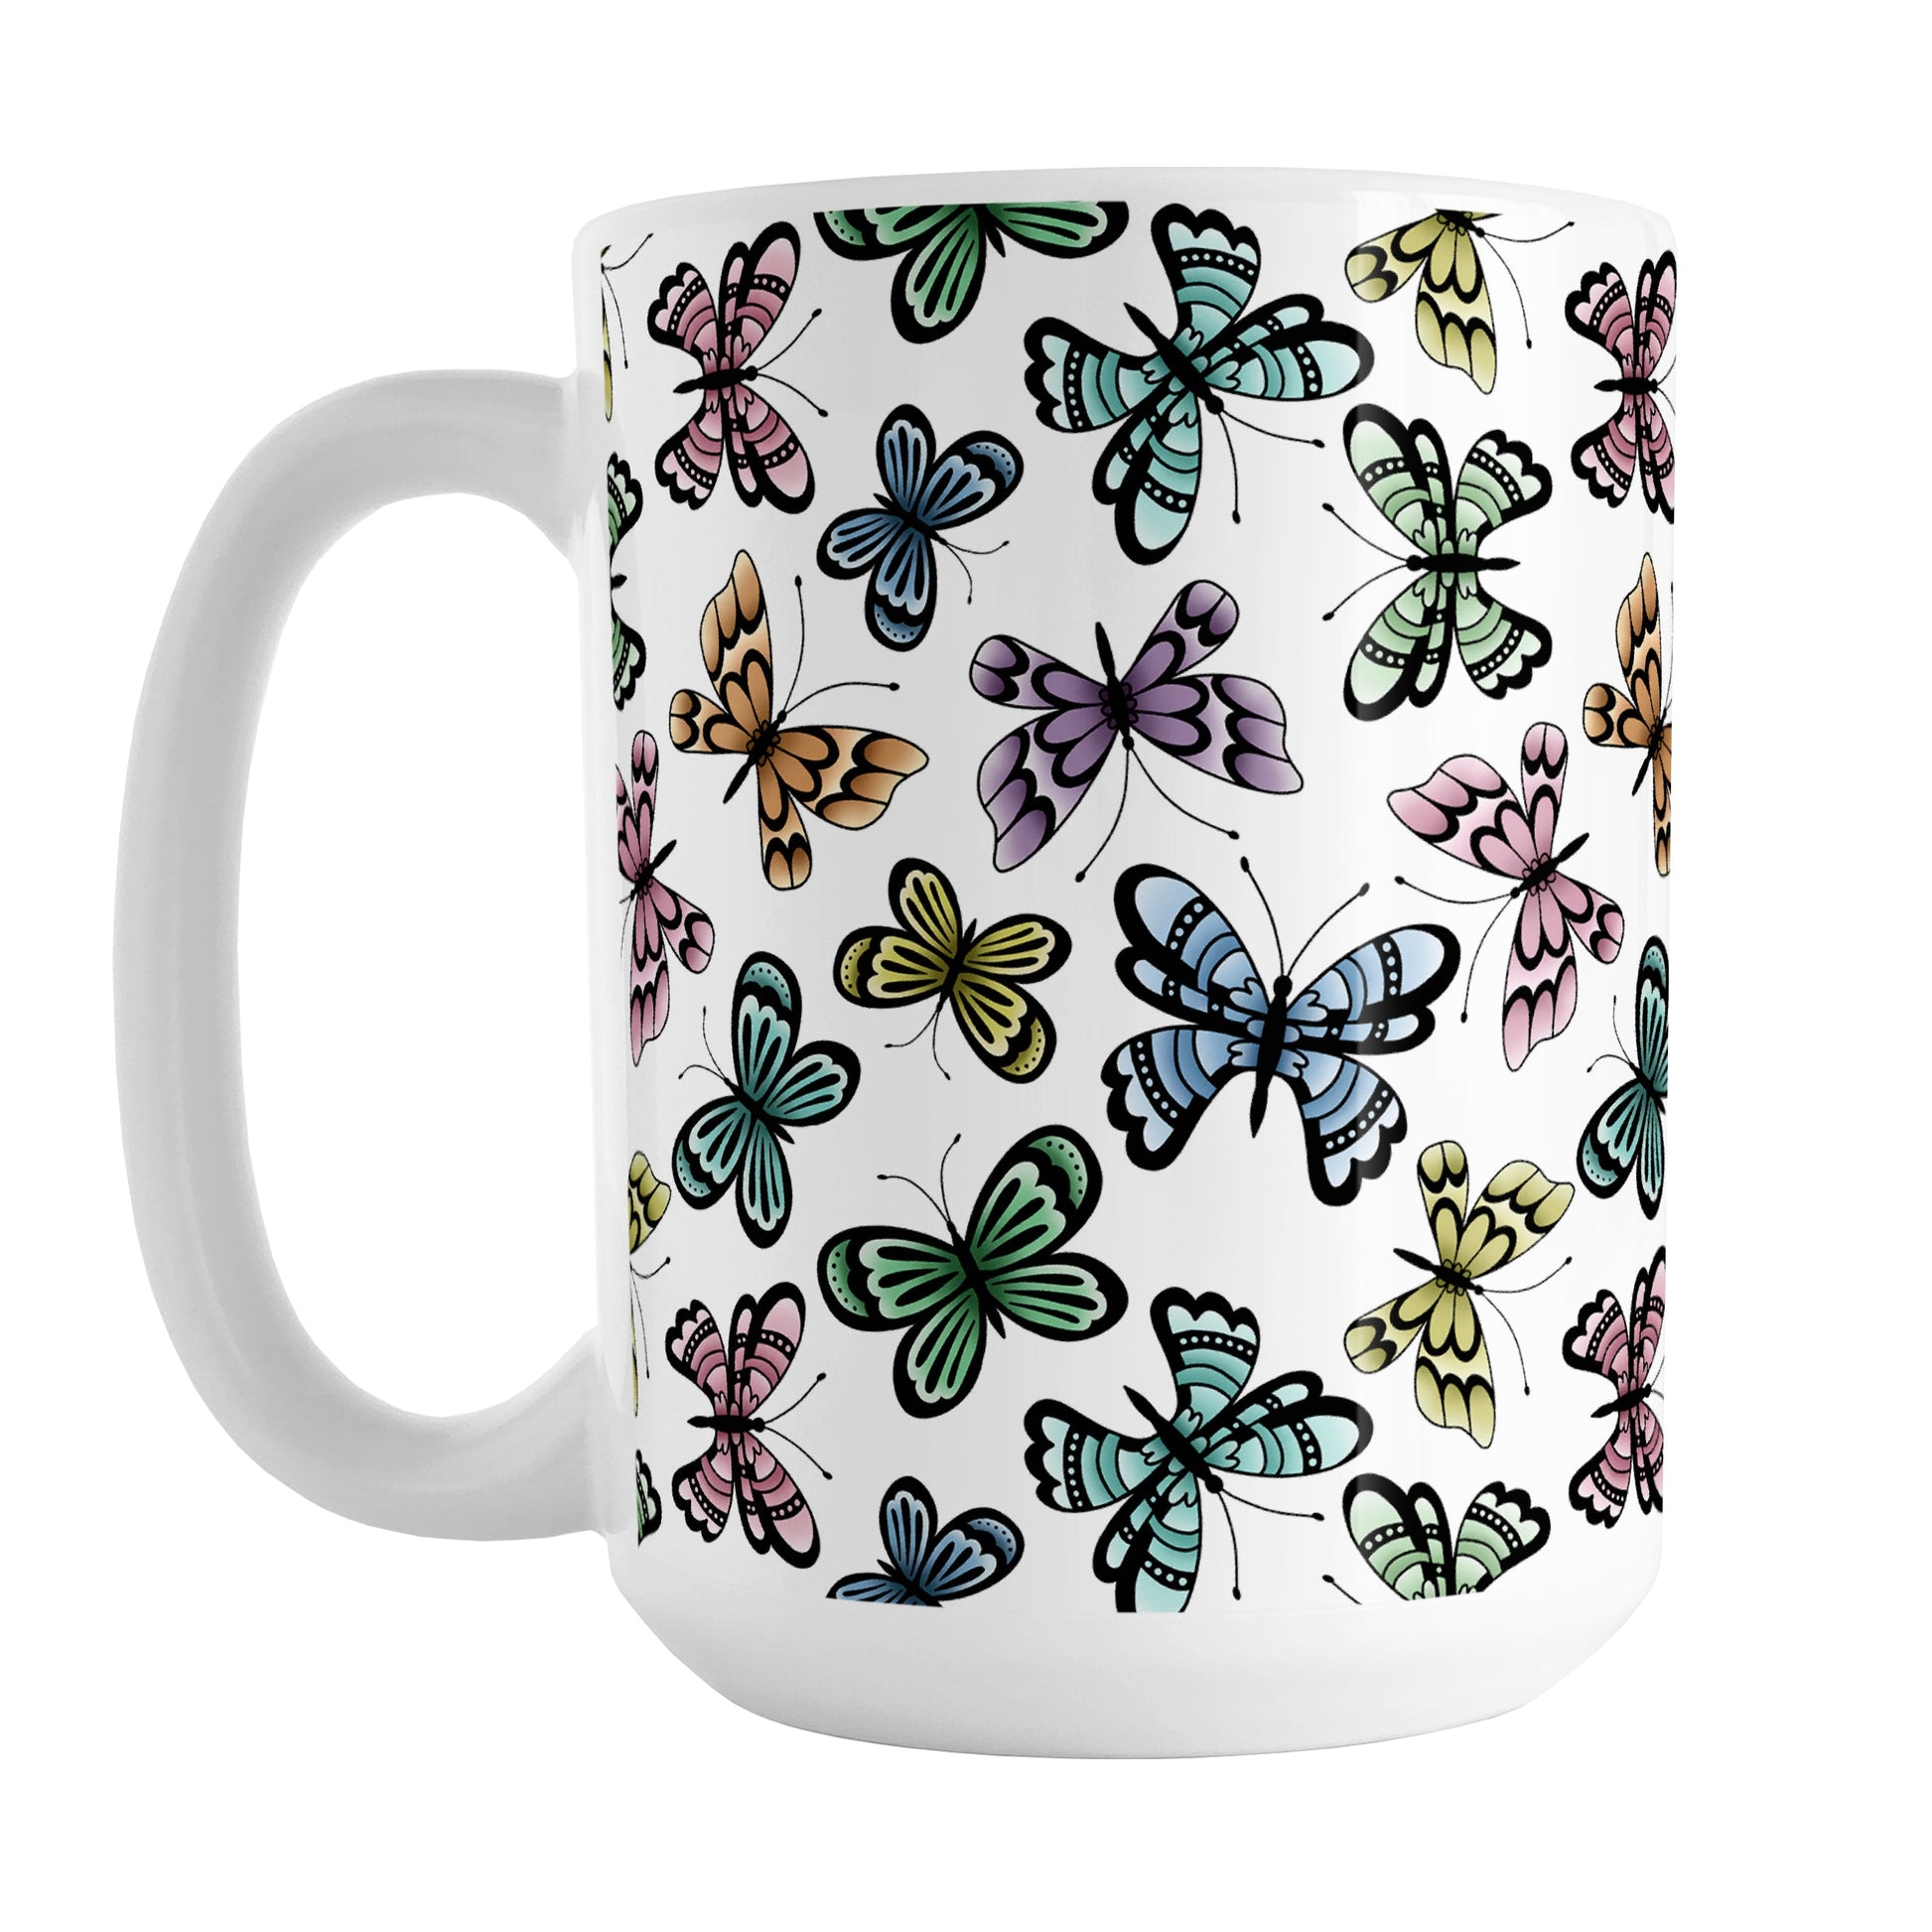 Pretty Butterfly Pattern Mug (15oz) at Amy's Coffee Mugs. A ceramic coffee mug designed with pretty and colorful butterflies in a pattern that wraps around the mug to the handle. This mug is perfect for people who love butterflies and colorful nature designs. 